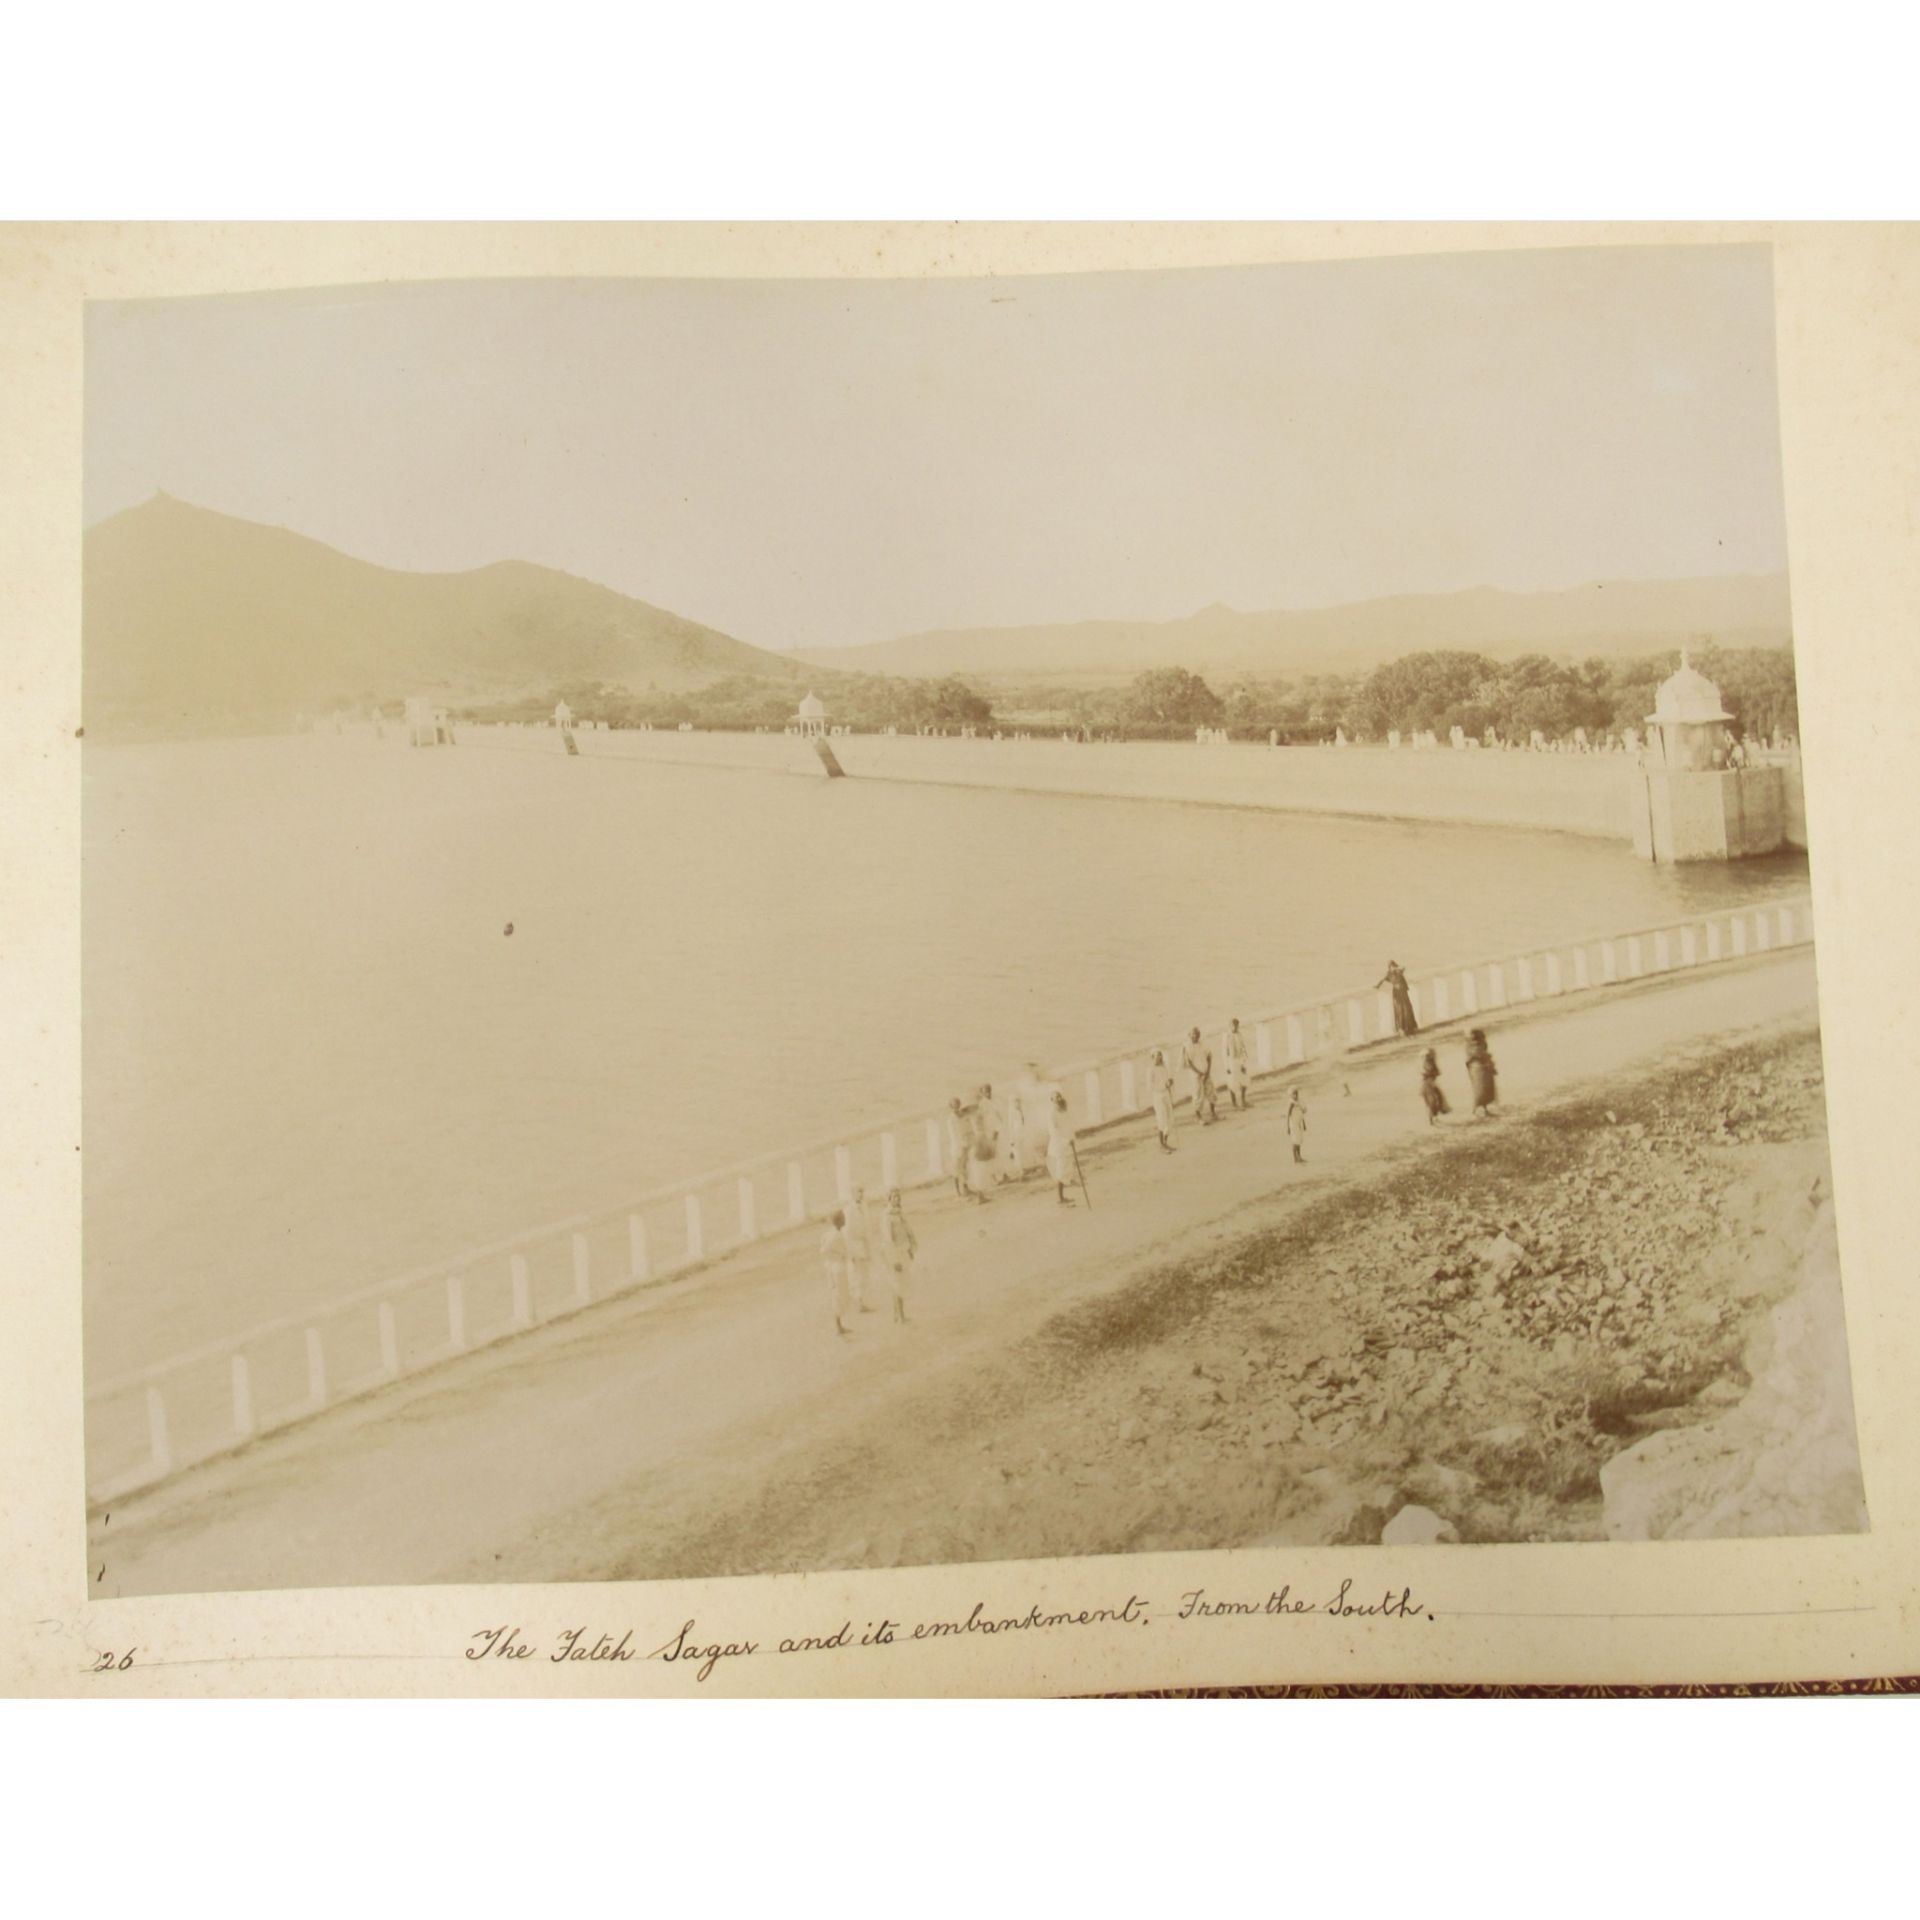 India: a photograph album Photographs of Rajasthan by Mohan Lal of Udaipur, late 19th century - Image 20 of 23